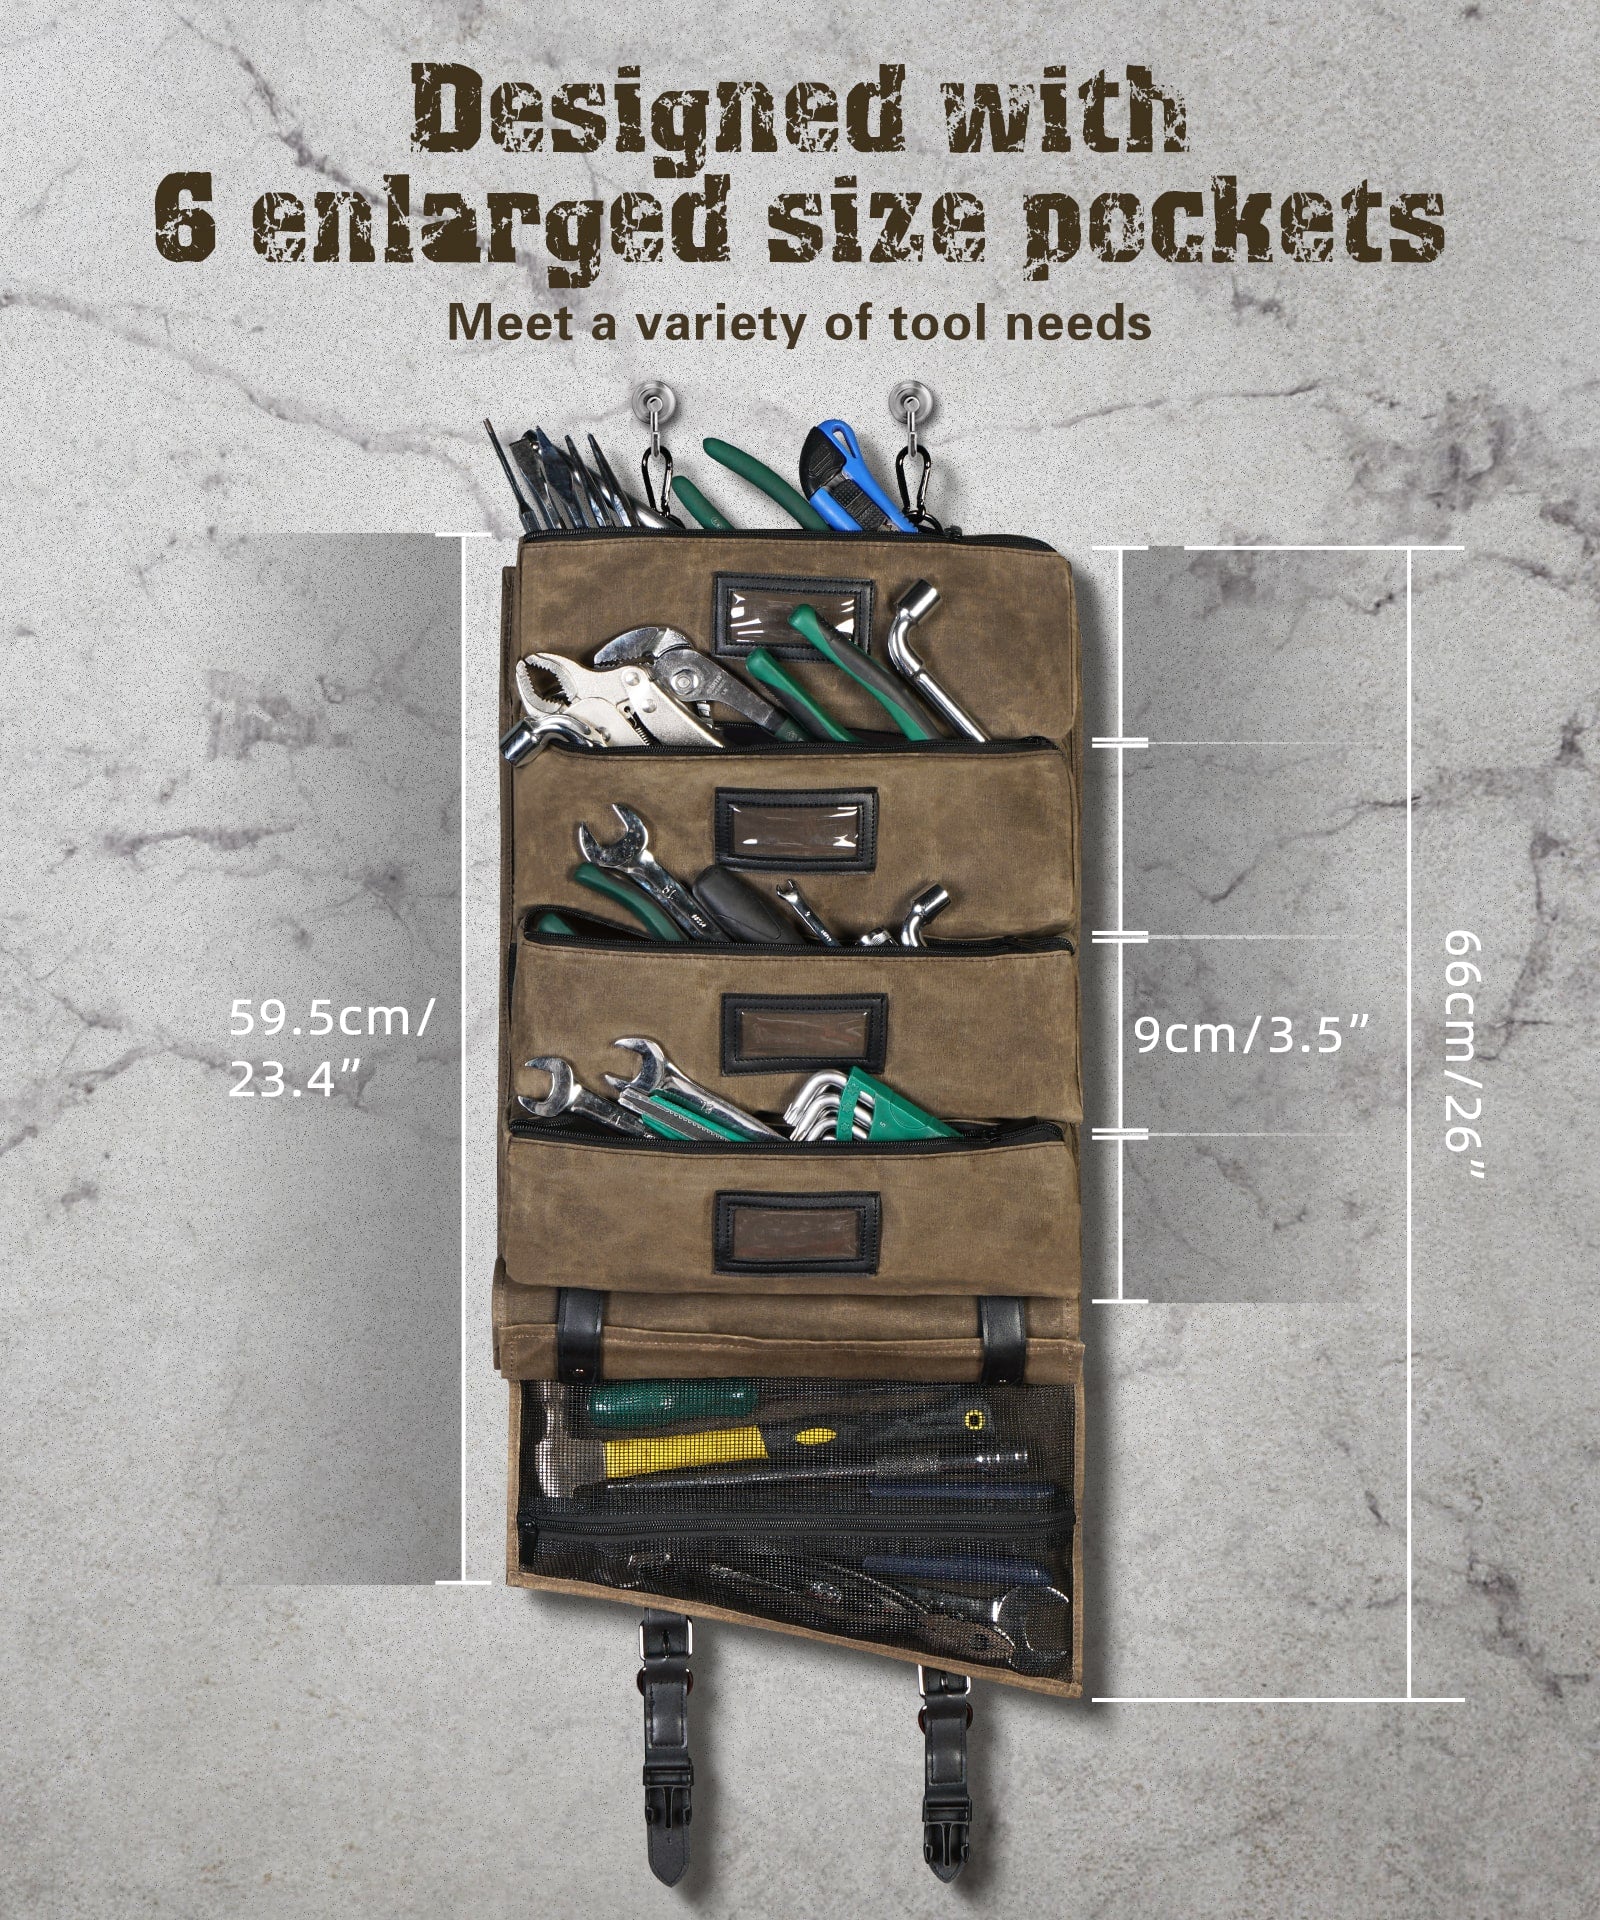 Tool Roll Up Bag Heavy Duty Oil Waxed Canvas Organizer with 5 Detachable Pouches Enlarged Size for Mechanics Electricians